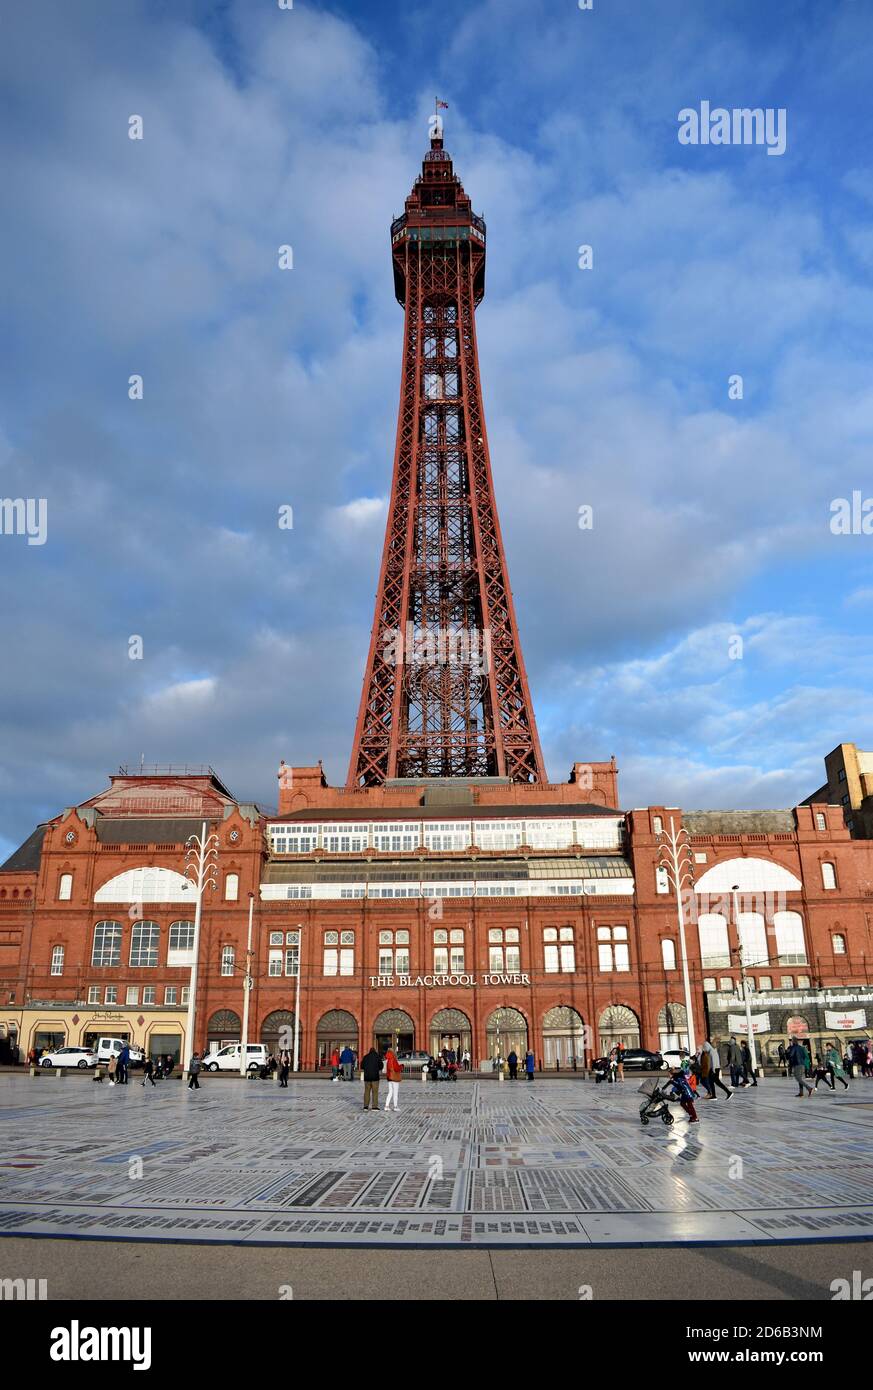 Looking towards the Blackpool Tower and victorian tower buildings, an entertainment complex. In front of the tower, Blackpool's Comedy Carpet is seen. Stock Photo